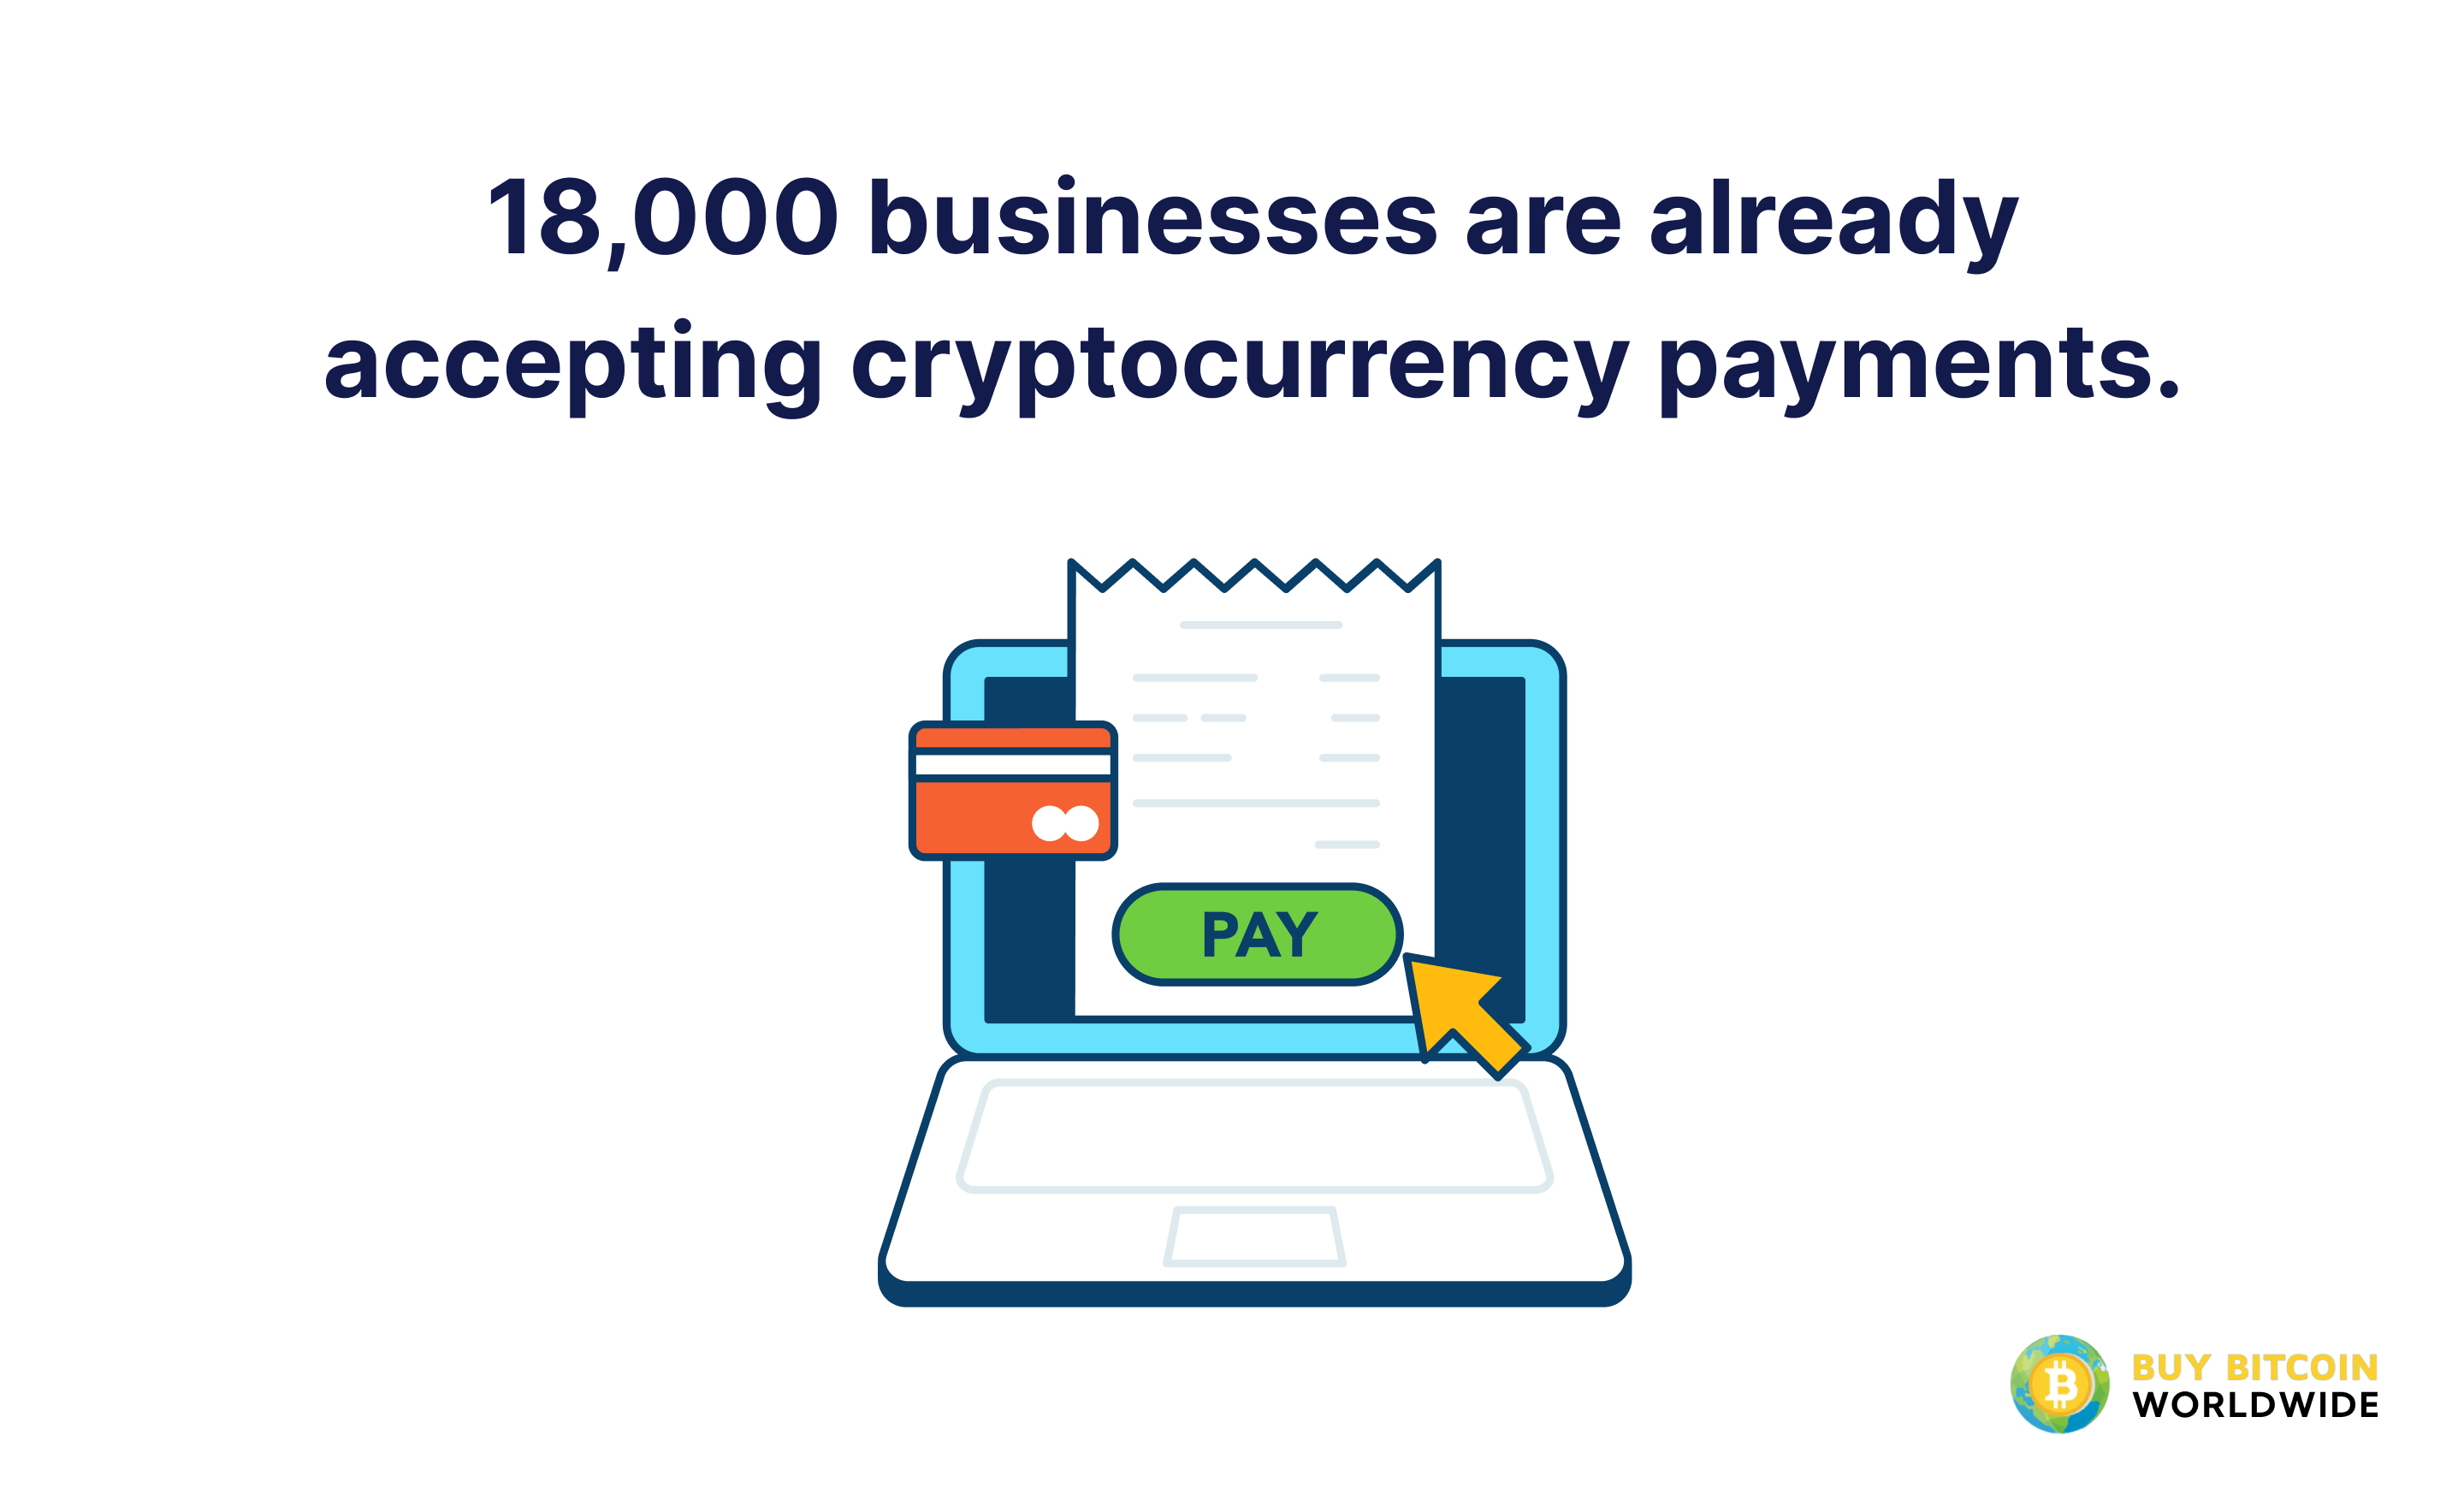 18,000 businesses already accept crypto payments